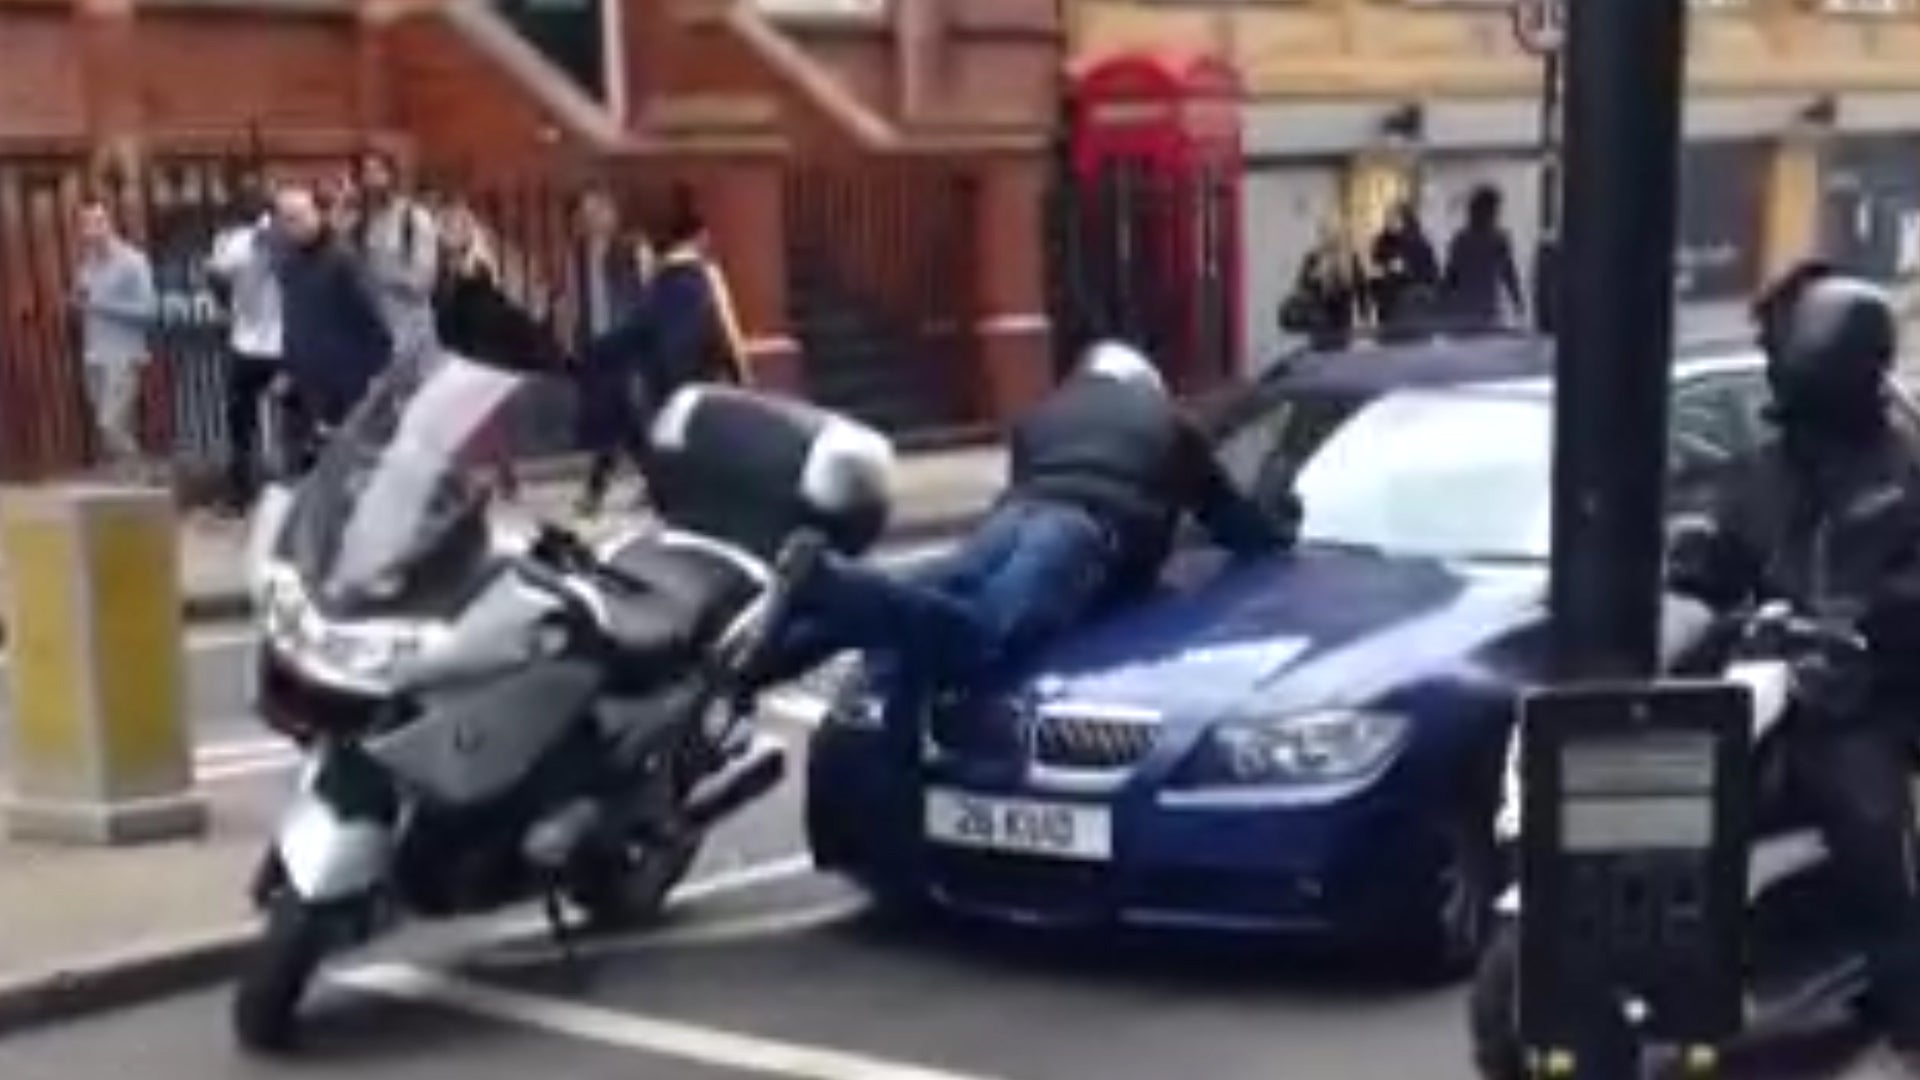 Road rage video shows motorcyclist damage vehicle during London rush hour